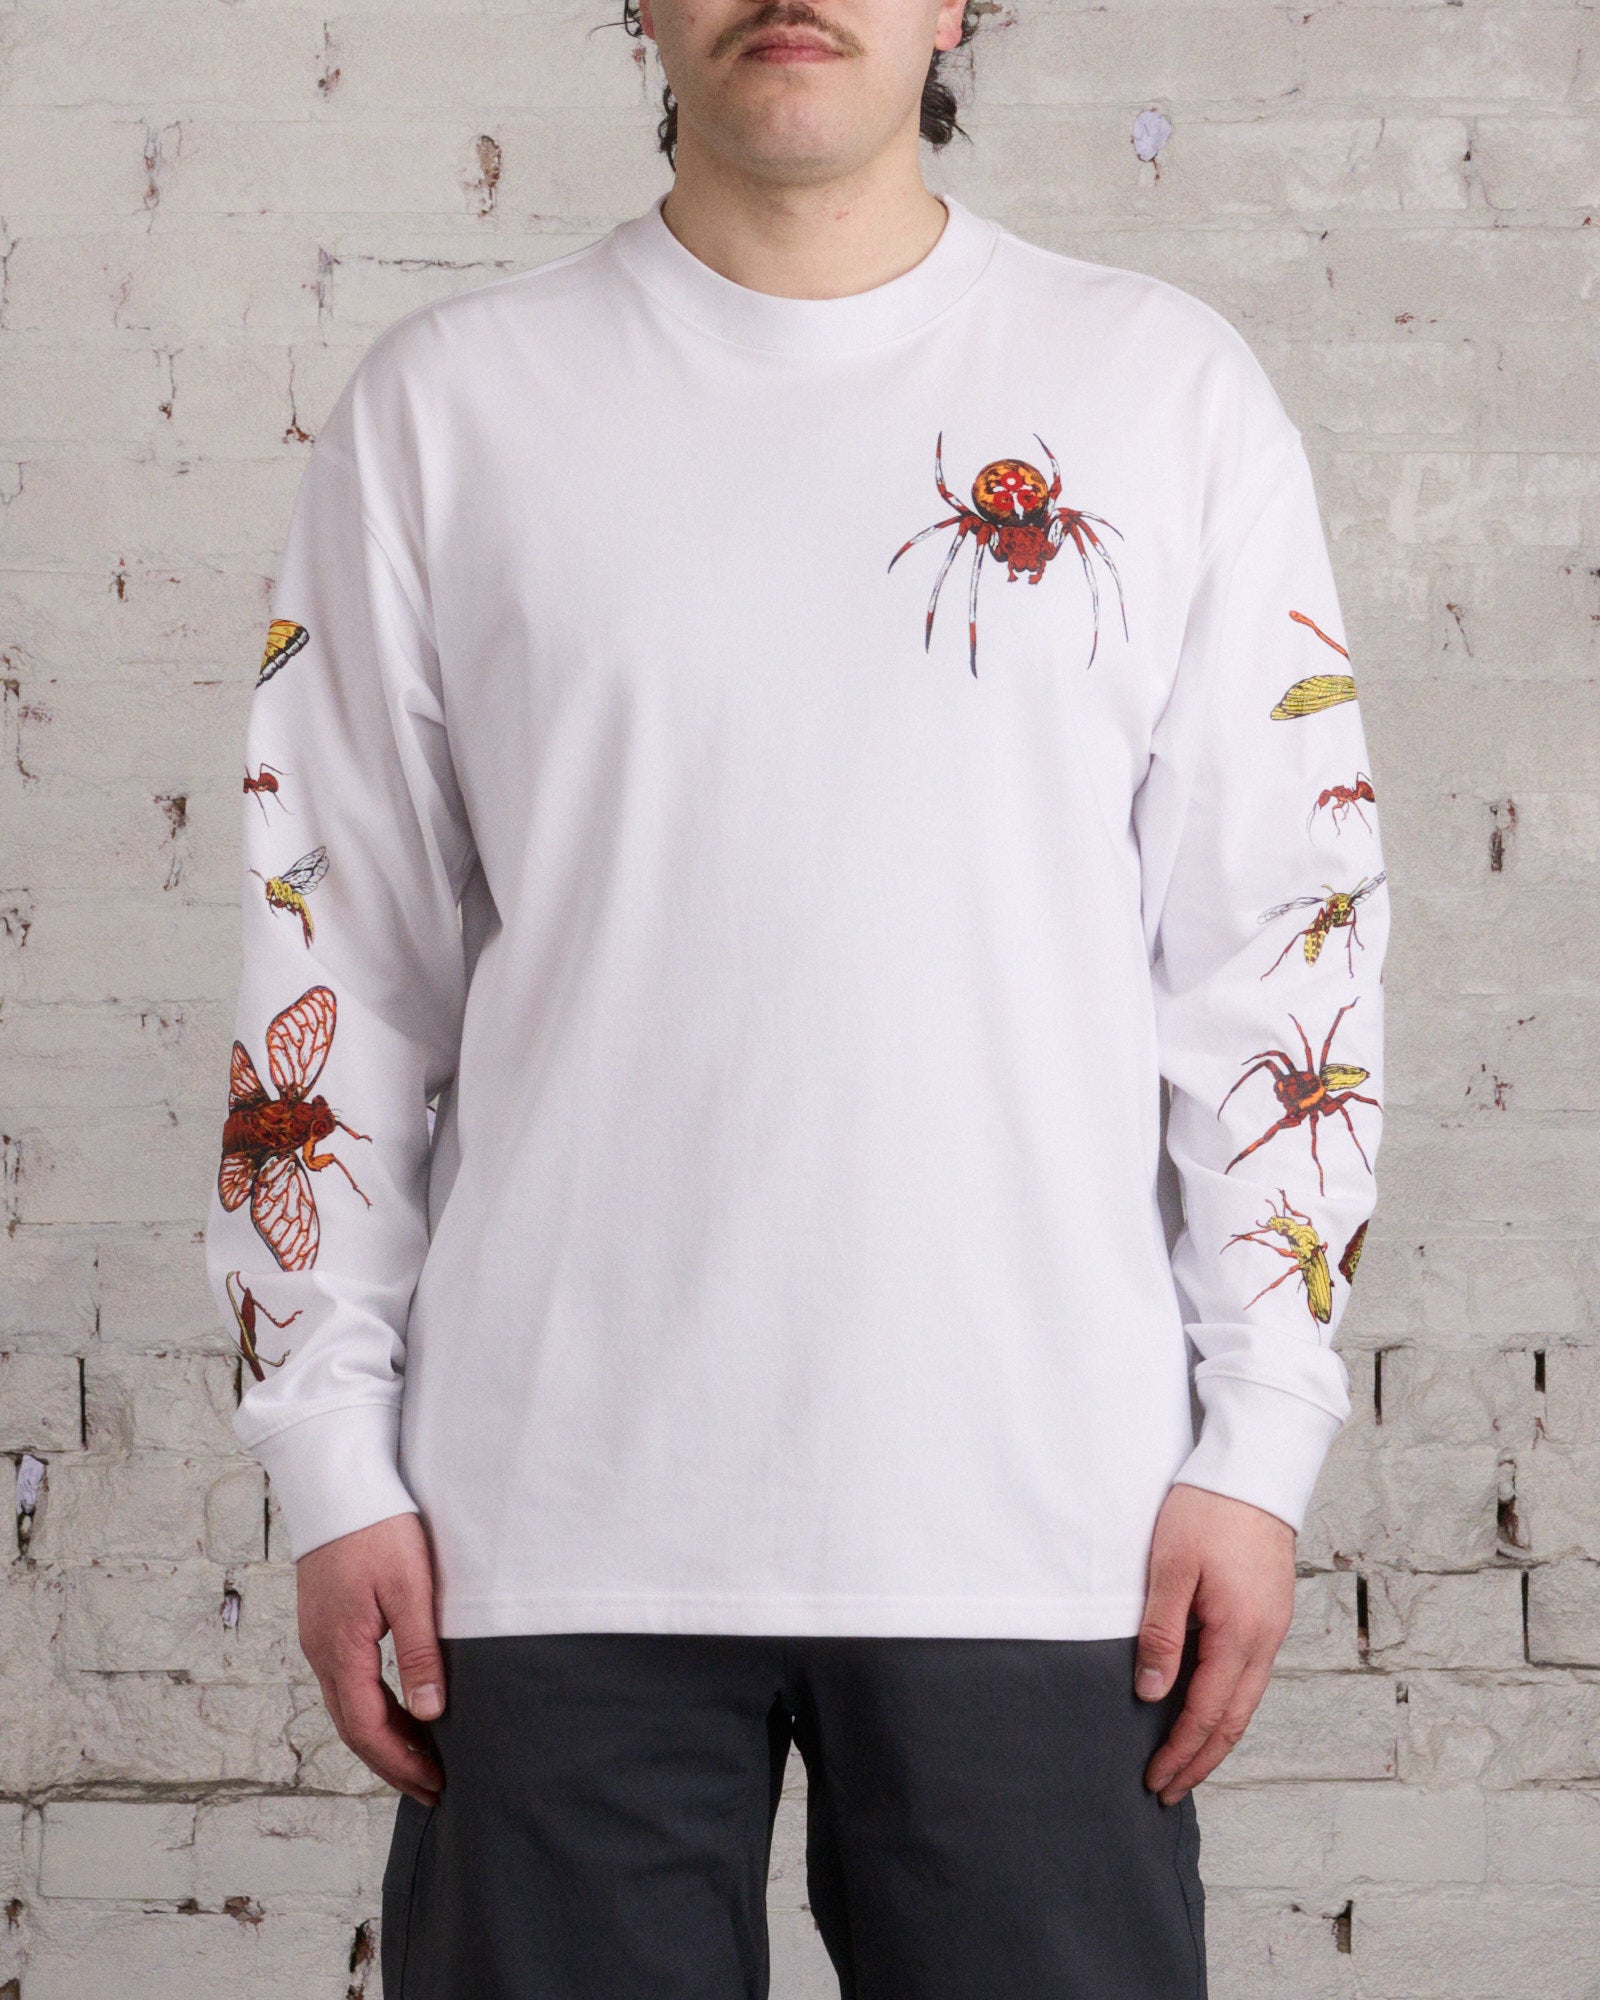 NIKE ACG INSECTS TEE 海外Sサイズ ホワイト - Tシャツ